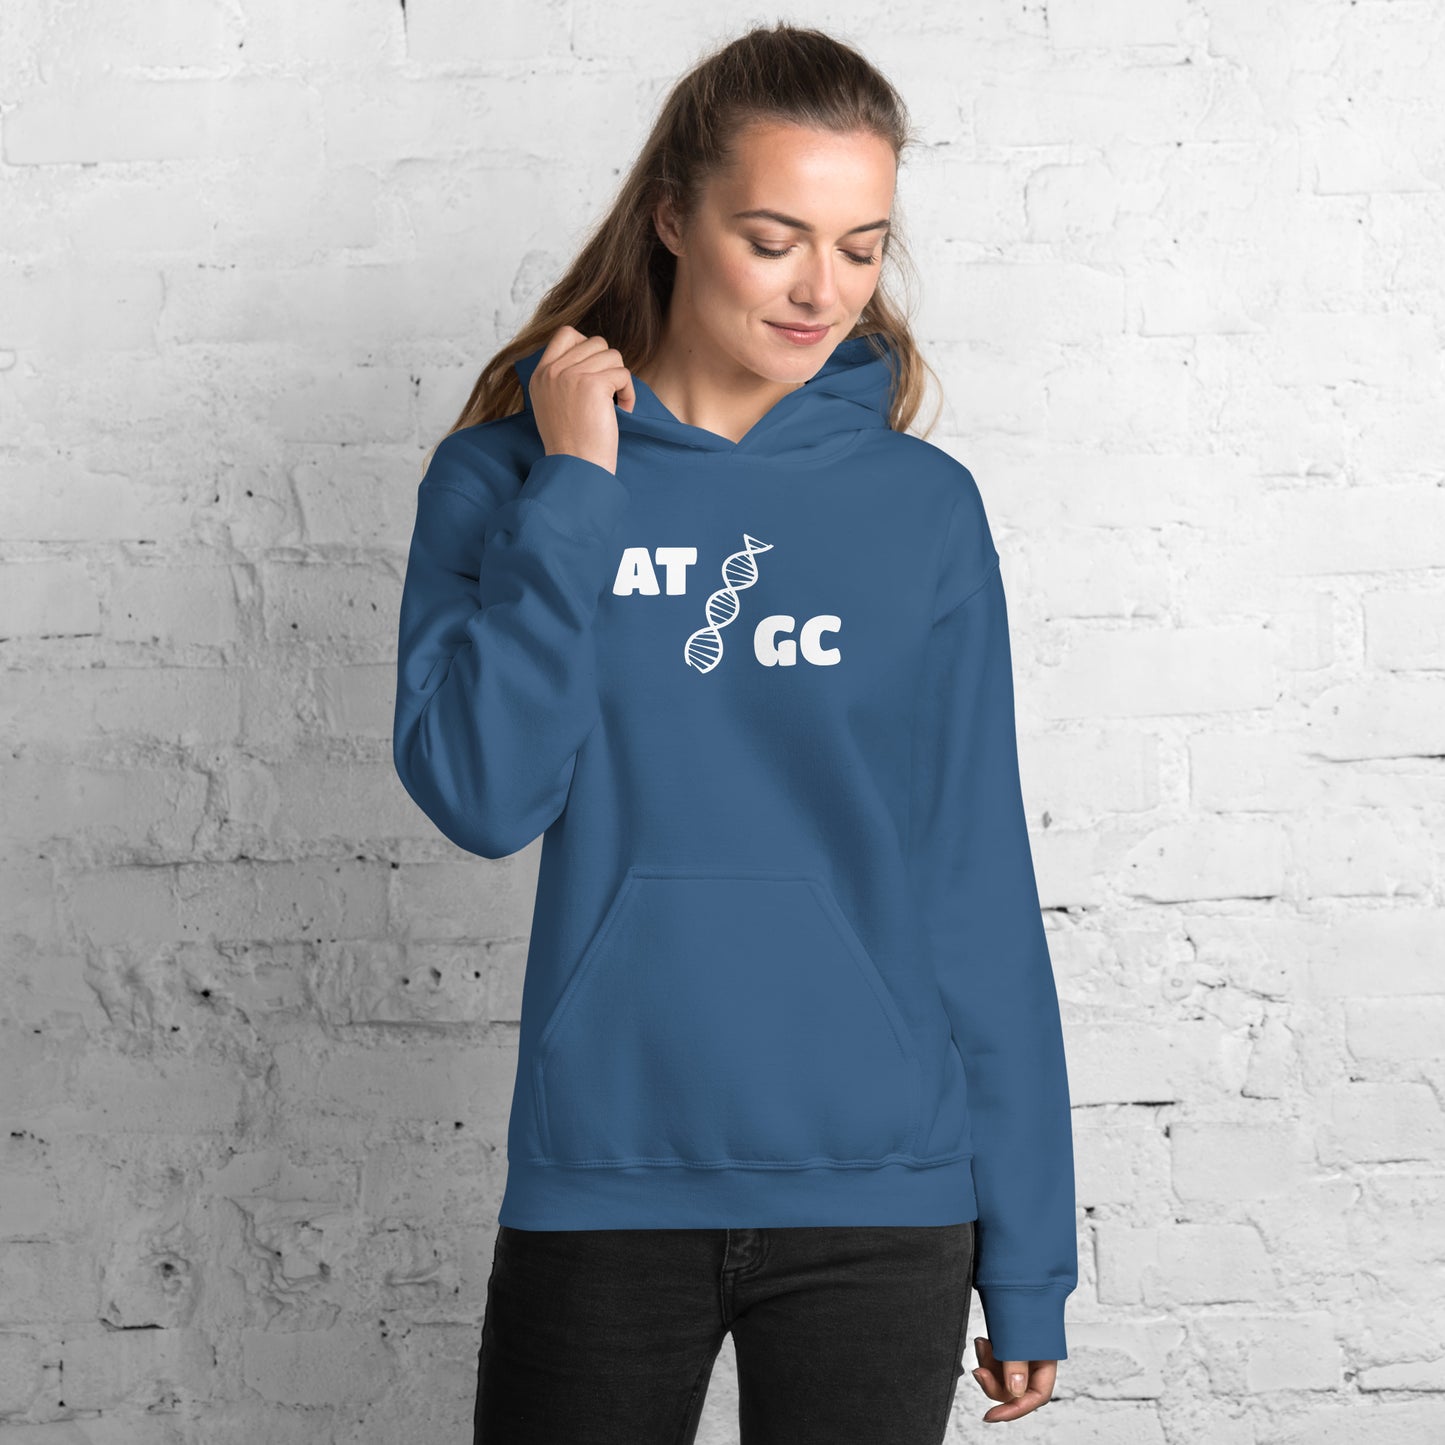 Women with indigo blue hoodie with image of a DNA string and the text "ATGC"